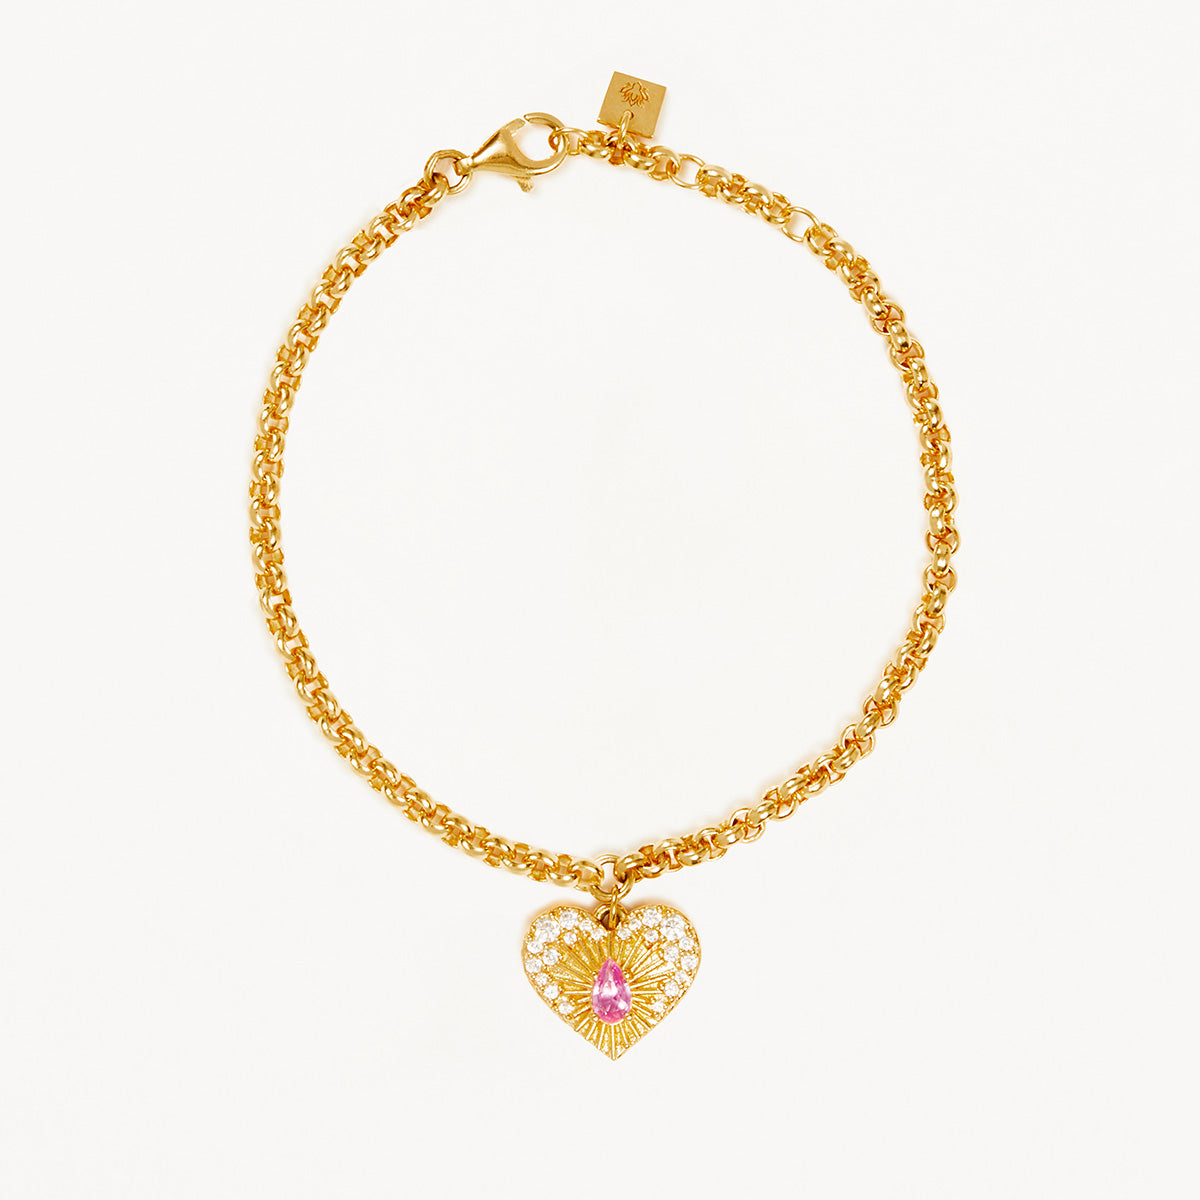 Connect With Your Heart Bracelet - 18k Gold Vermail